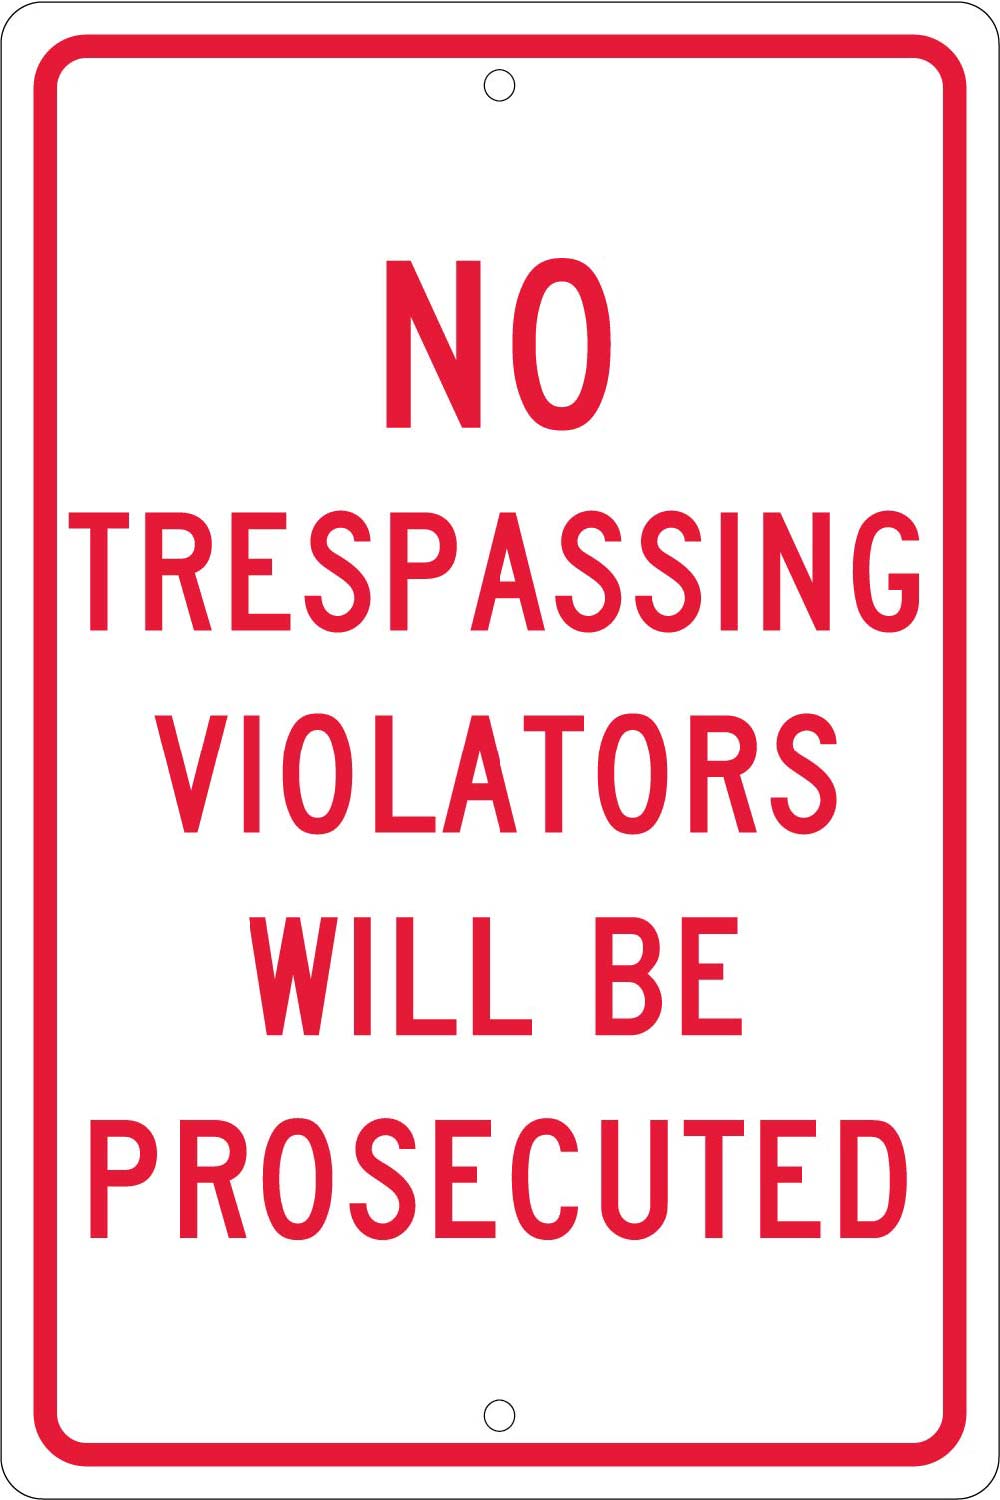 No Trespassing Violators Will Be Prosecuted Sign-eSafety Supplies, Inc